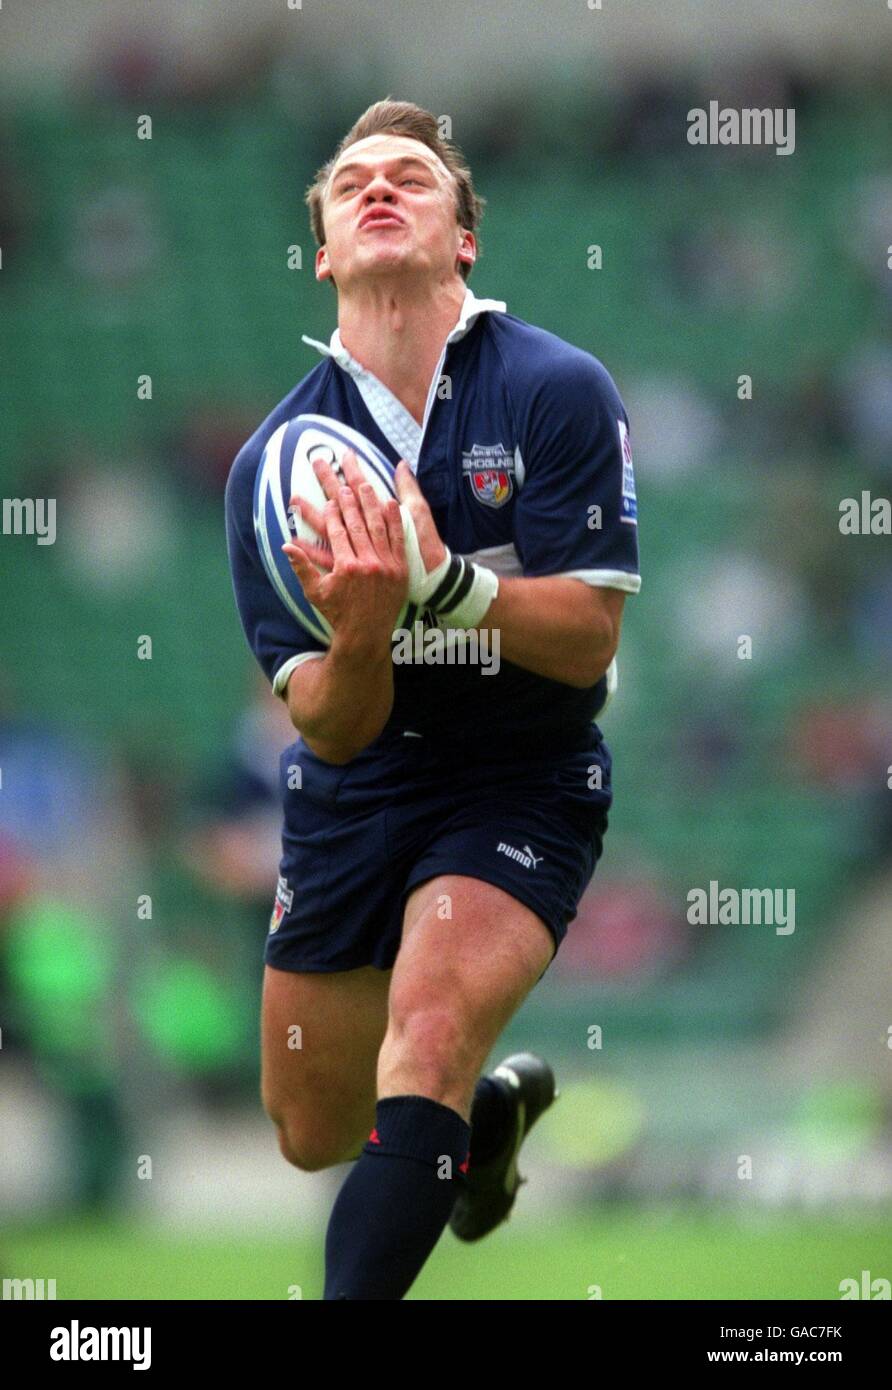 Rugby Union - Zurich Championship - Final - Bristol v Gloucester. Bristol's Phil Christophers catches the ball Stock Photo